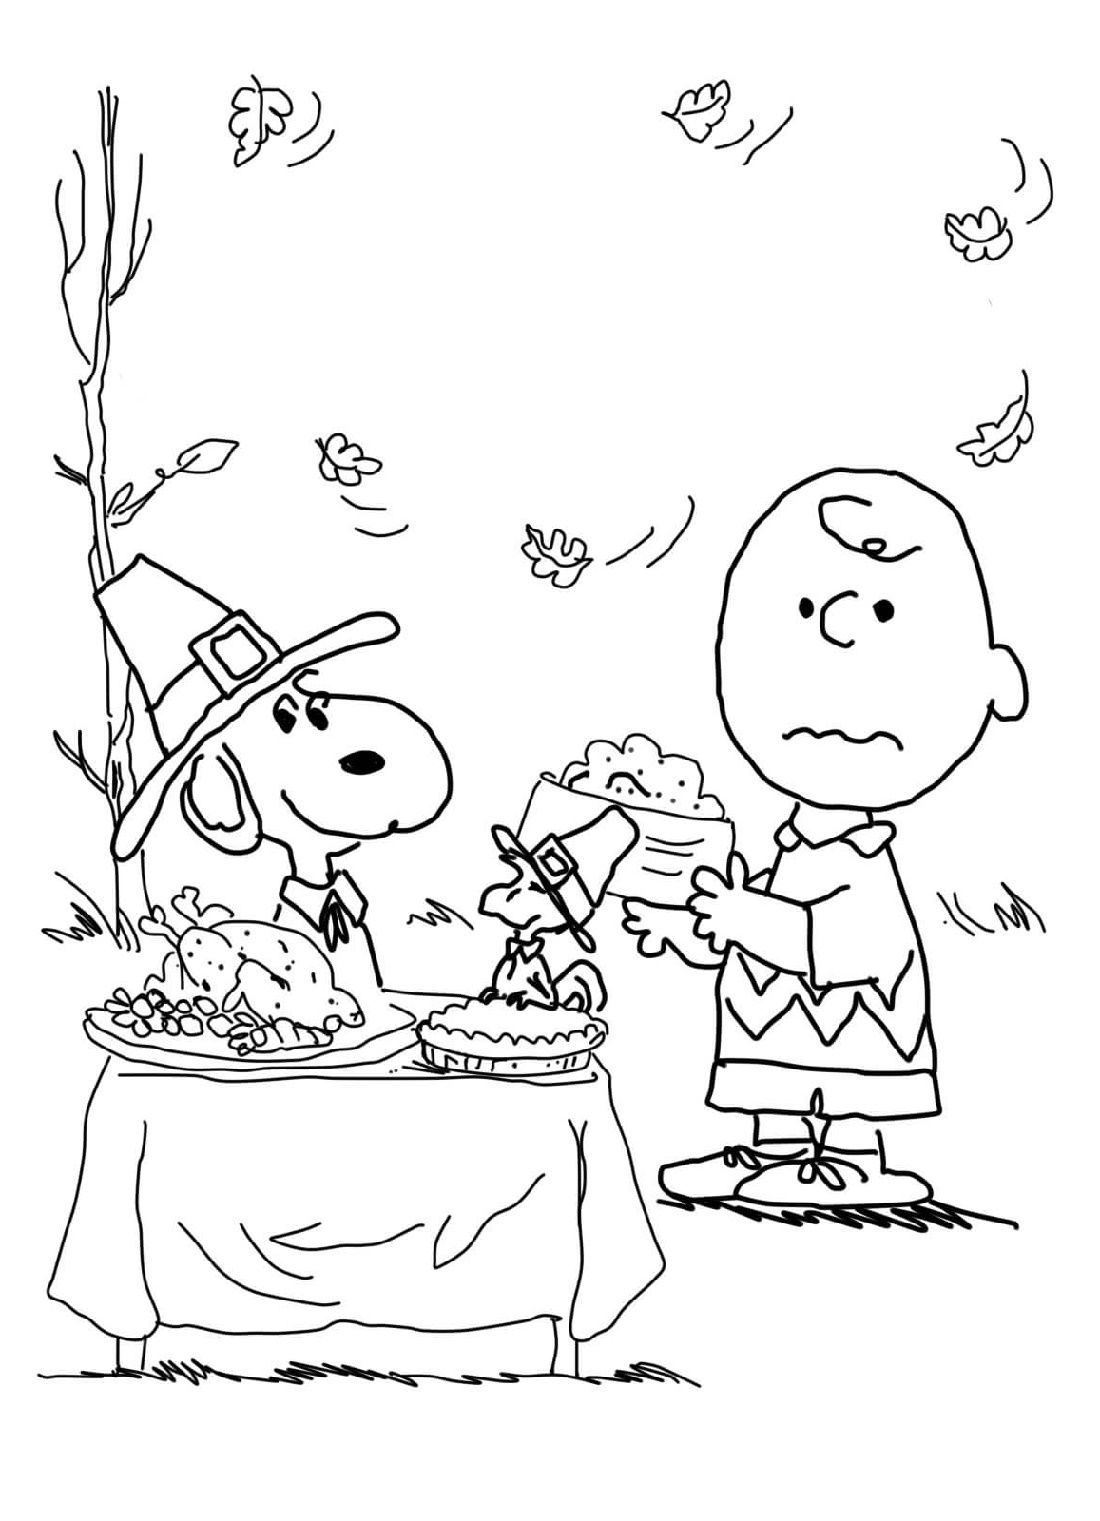 Printable thanksgiving coloring pages charlie brown christmas coloring pages thanksgiving coloring pages thanksgiving worksheets